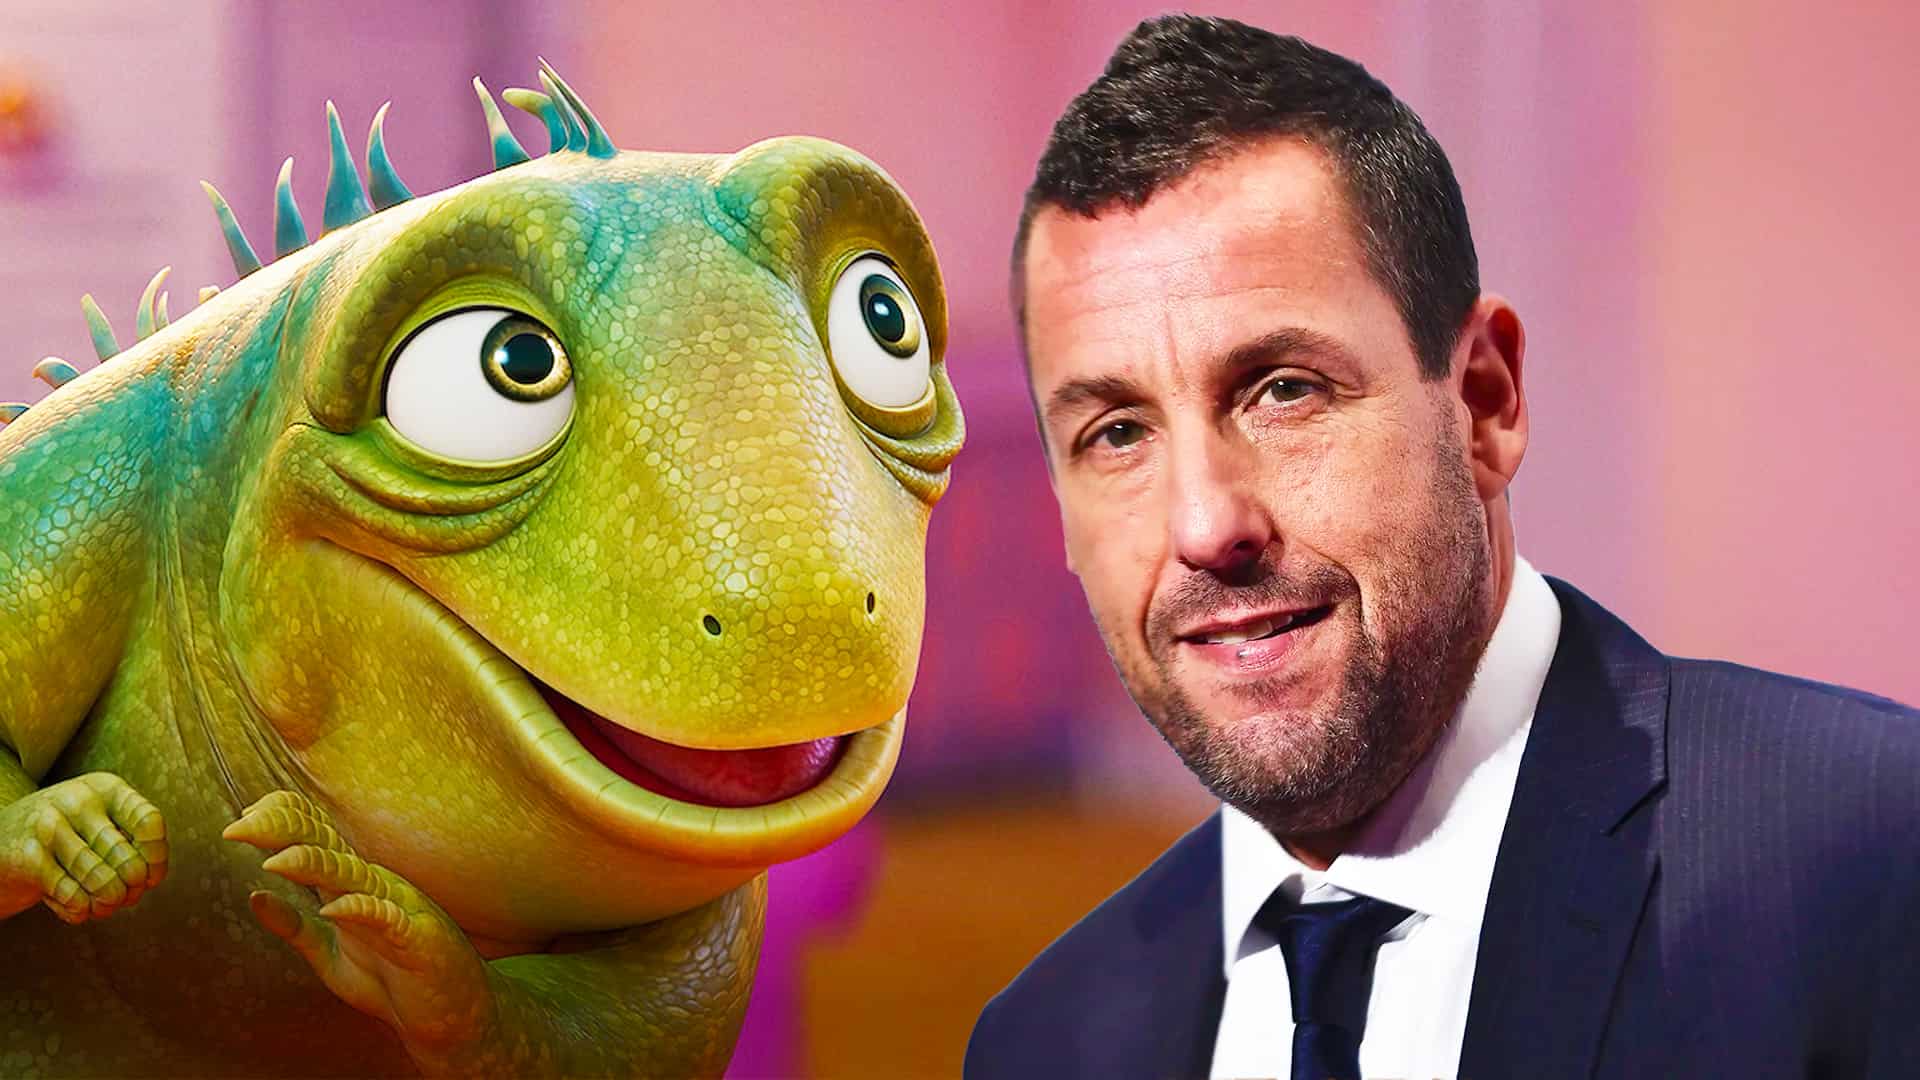 Leo: Adam Sandler's New Animated Musical Is The Top Movie On Netflix